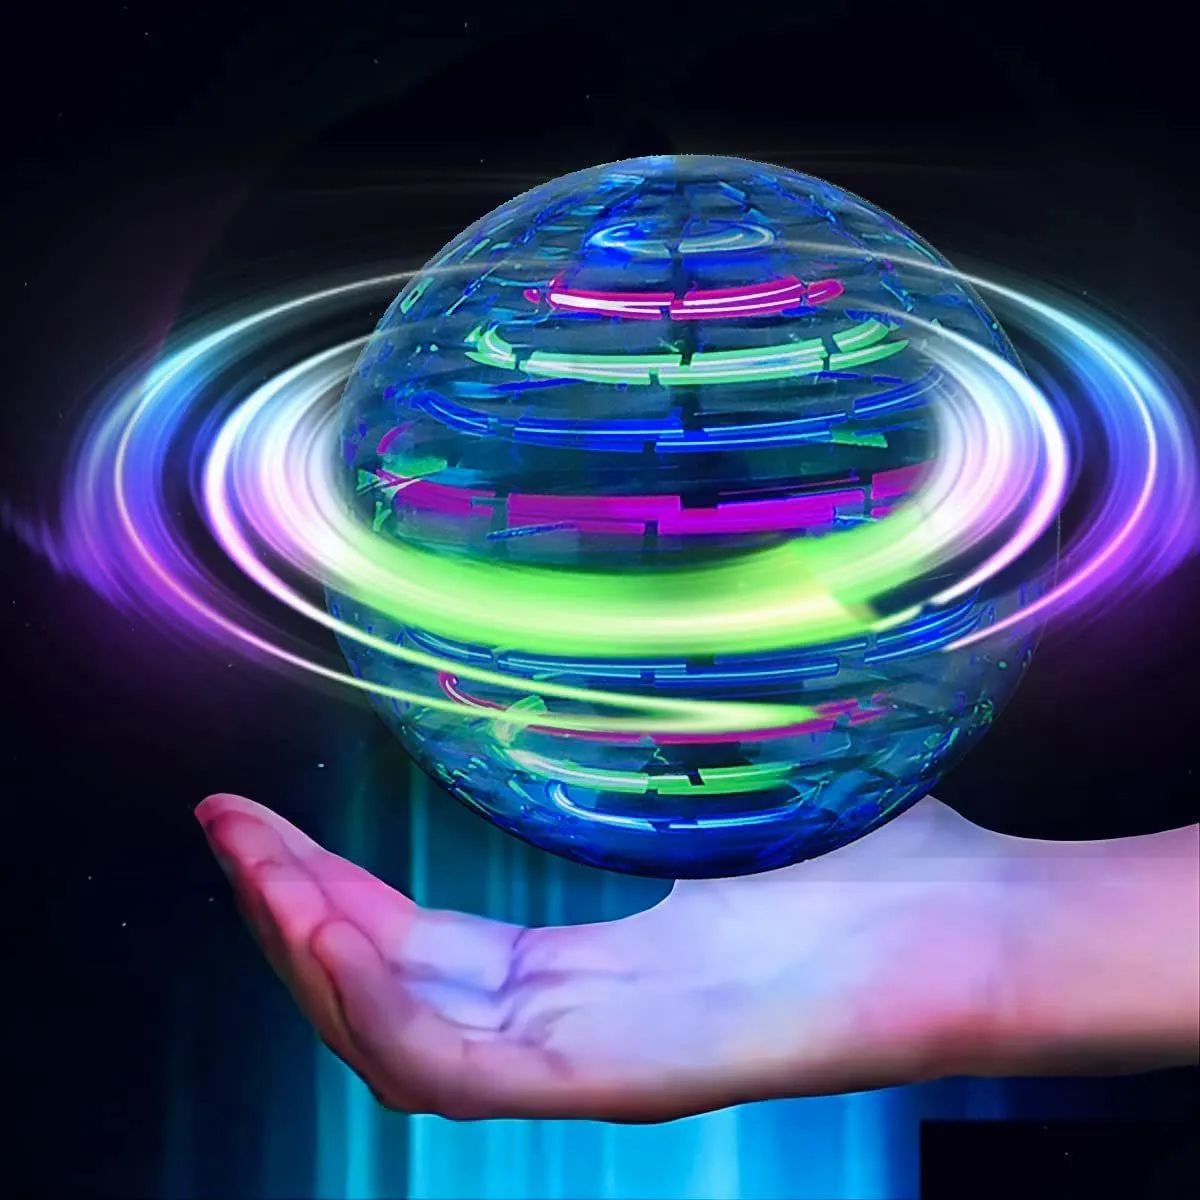 magic balls flying ball toy mini drone globe 360ﾰ rotating builtin rgb light hover spinner space orb for kids adts indoor outdoor dr